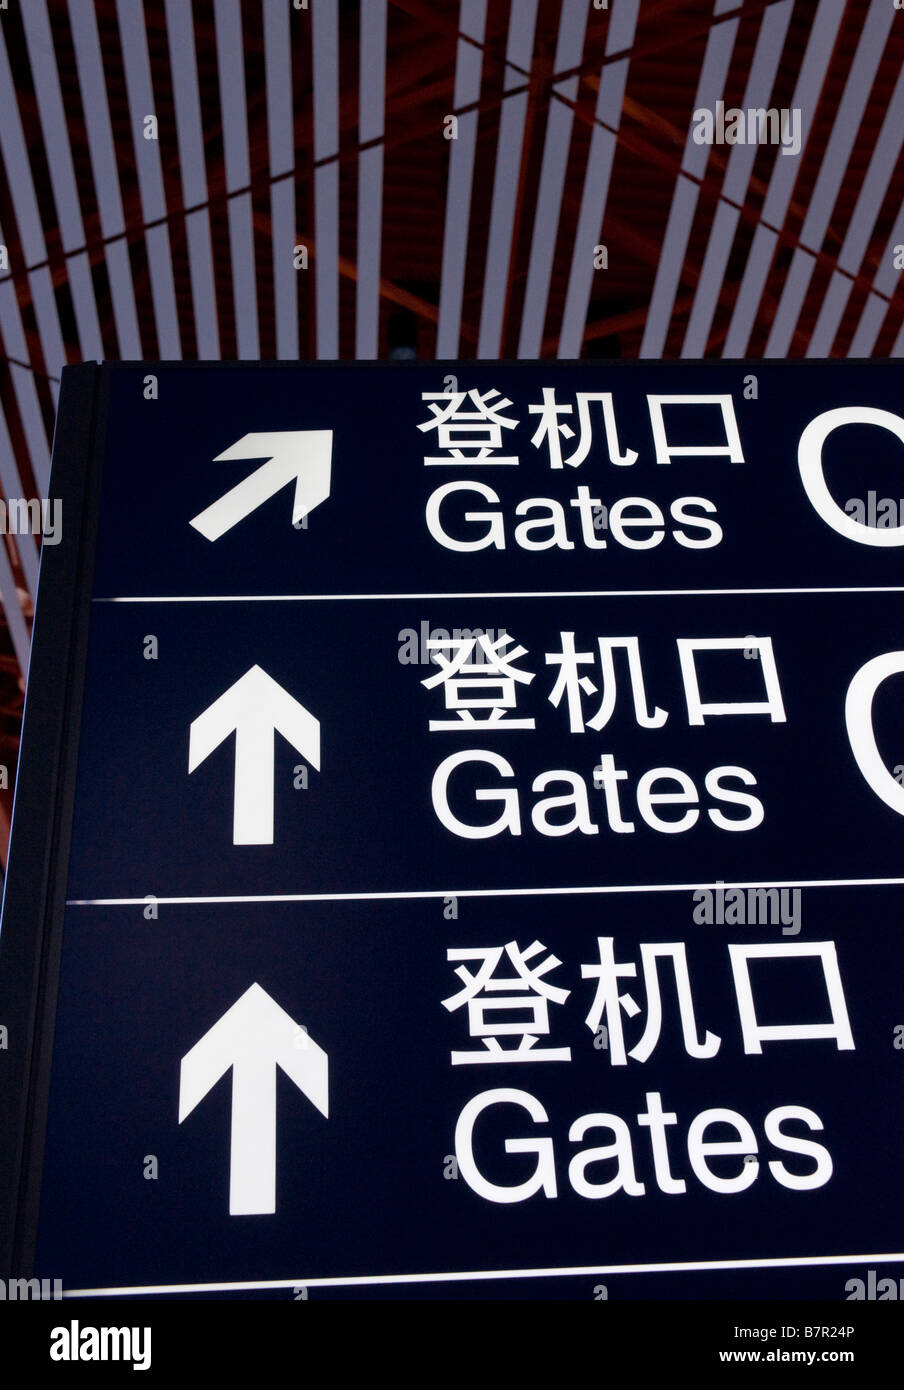 Airport information direction sign in China showing location to departure gates Stock Photo